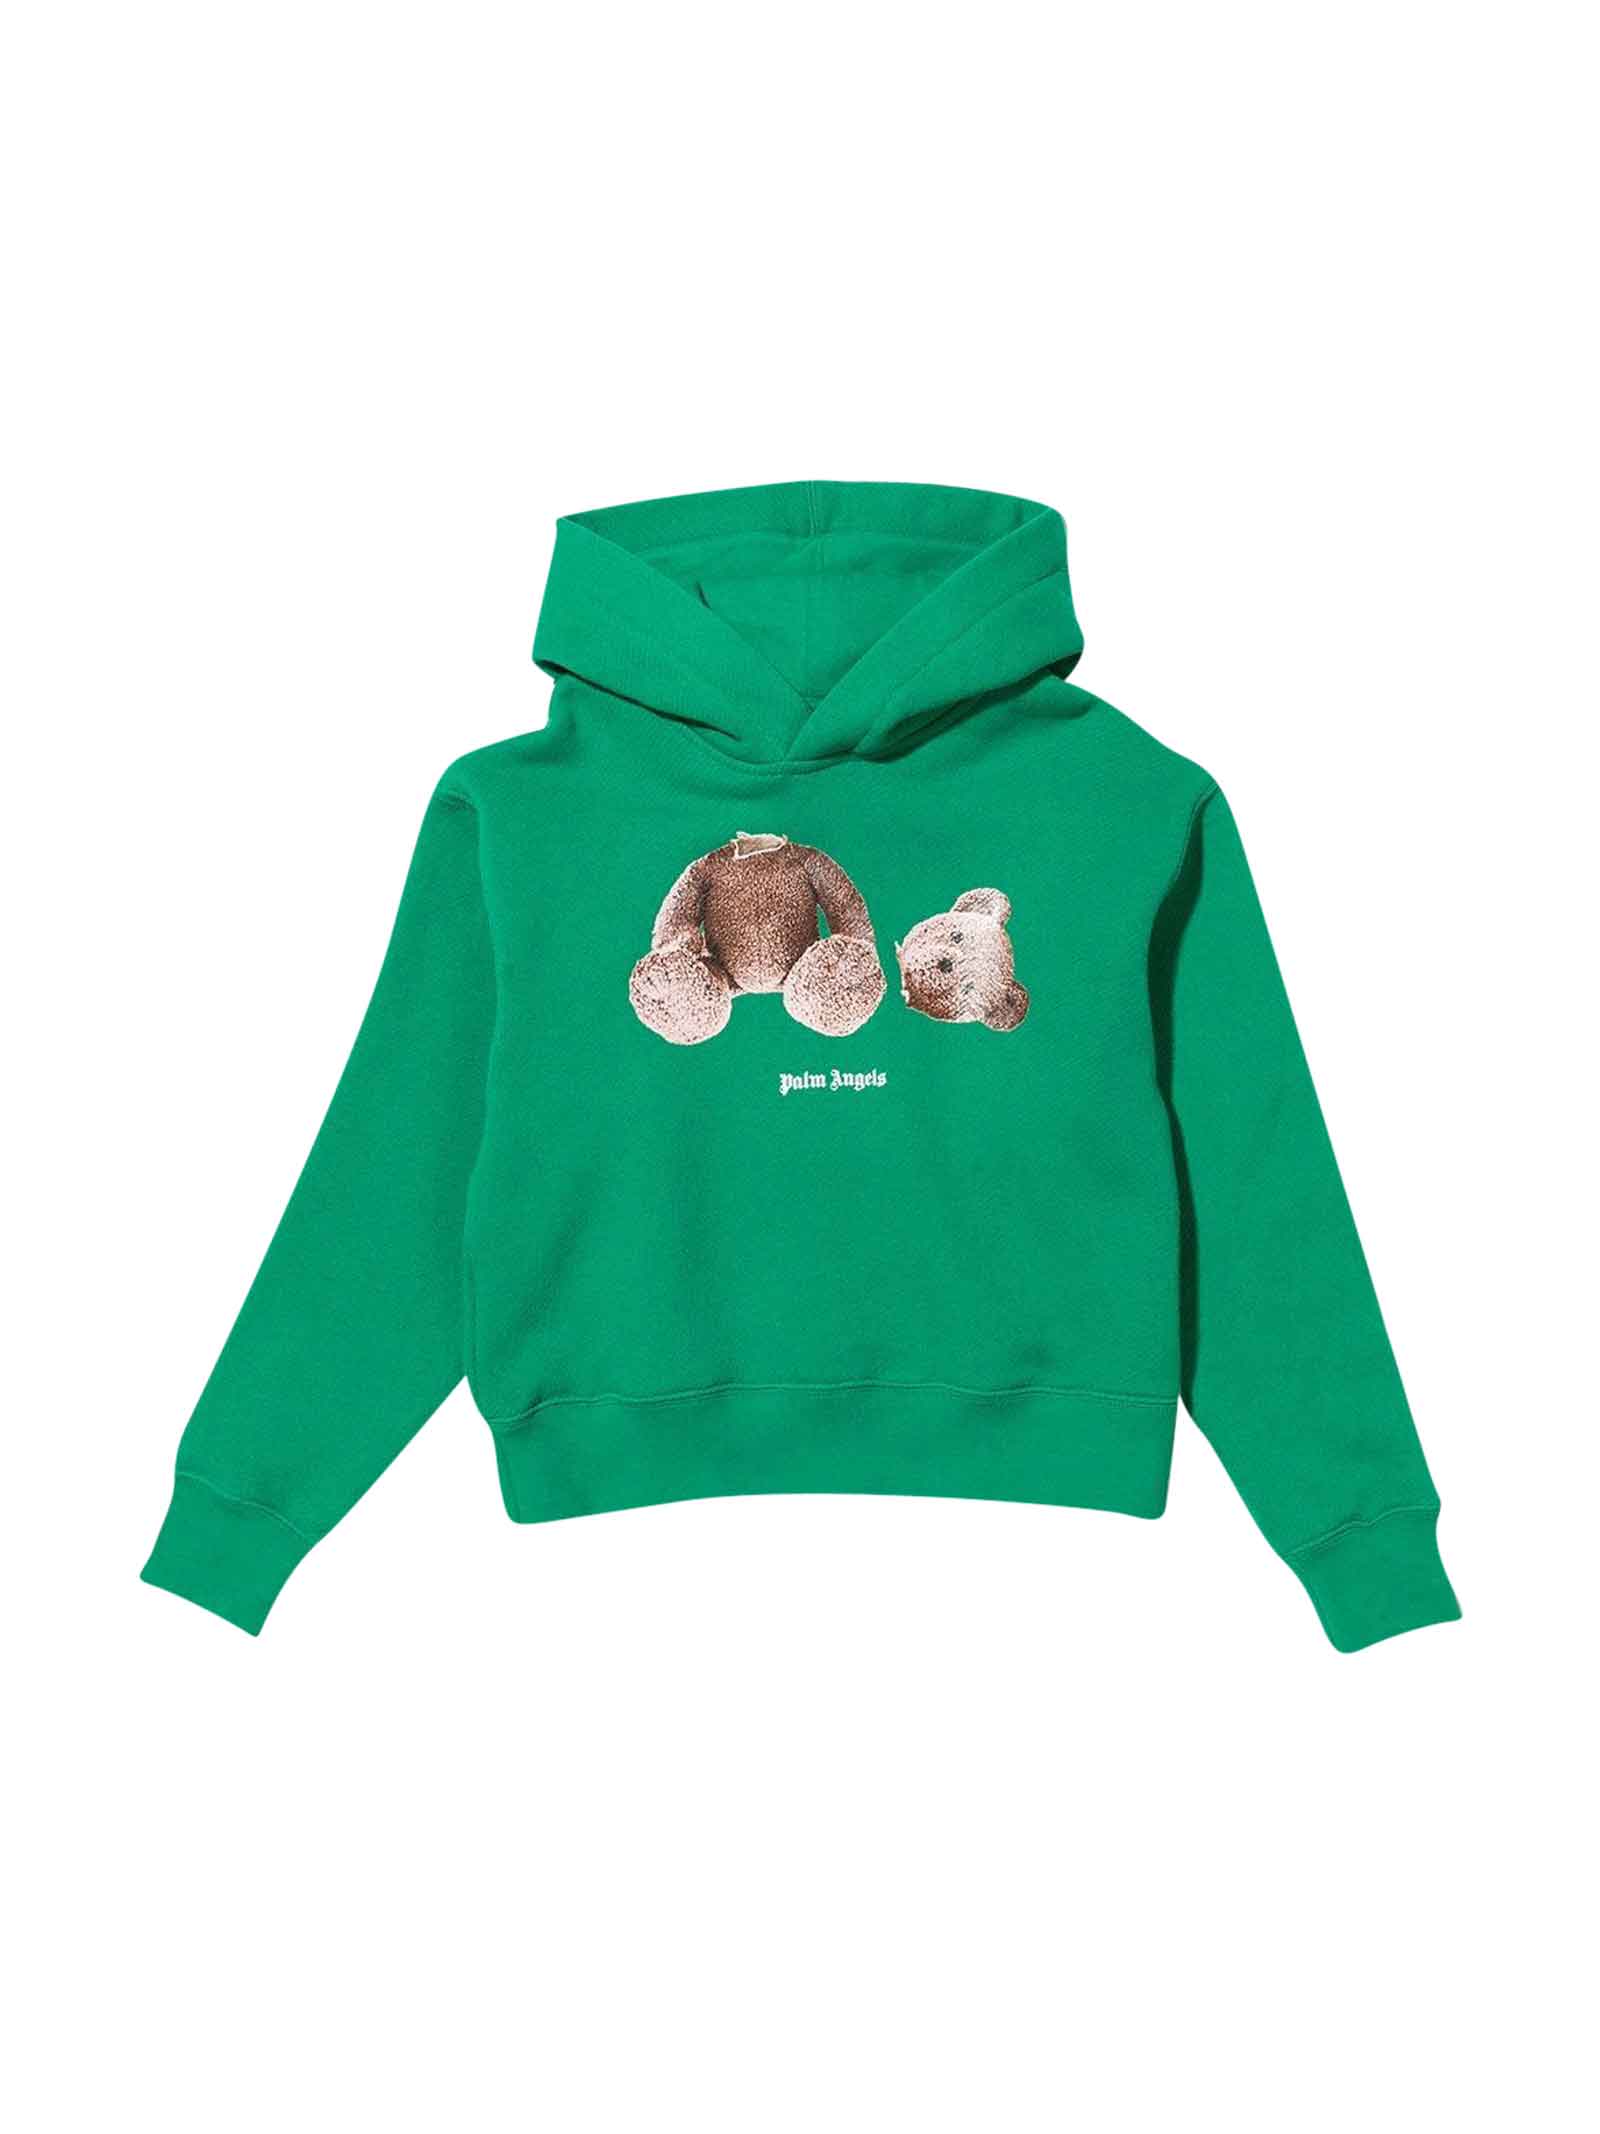 Palm Angels Green Hooded Sweatshirt With Palm Angels Print